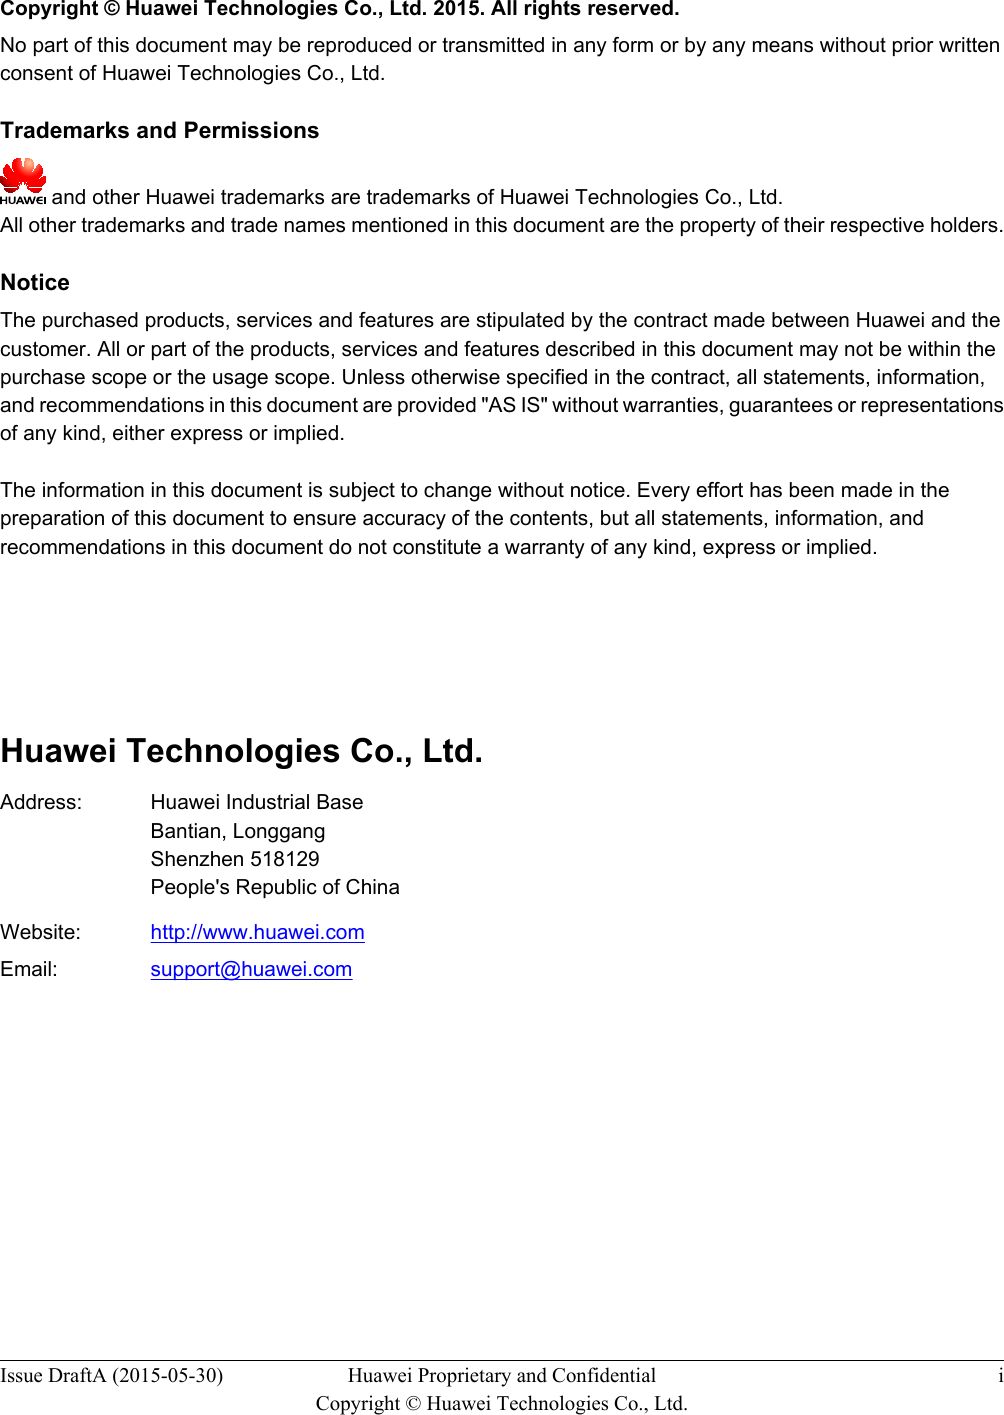   Copyright © Huawei Technologies Co., Ltd. 2015. All rights reserved.No part of this document may be reproduced or transmitted in any form or by any means without prior writtenconsent of Huawei Technologies Co., Ltd. Trademarks and Permissions and other Huawei trademarks are trademarks of Huawei Technologies Co., Ltd.All other trademarks and trade names mentioned in this document are the property of their respective holders. NoticeThe purchased products, services and features are stipulated by the contract made between Huawei and thecustomer. All or part of the products, services and features described in this document may not be within thepurchase scope or the usage scope. Unless otherwise specified in the contract, all statements, information,and recommendations in this document are provided &quot;AS IS&quot; without warranties, guarantees or representationsof any kind, either express or implied.The information in this document is subject to change without notice. Every effort has been made in thepreparation of this document to ensure accuracy of the contents, but all statements, information, andrecommendations in this document do not constitute a warranty of any kind, express or implied.       Huawei Technologies Co., Ltd.Address: Huawei Industrial BaseBantian, LonggangShenzhen 518129People&apos;s Republic of ChinaWebsite: http://www.huawei.comEmail: support@huawei.comIssue DraftA (2015-05-30) Huawei Proprietary and ConfidentialCopyright © Huawei Technologies Co., Ltd.i